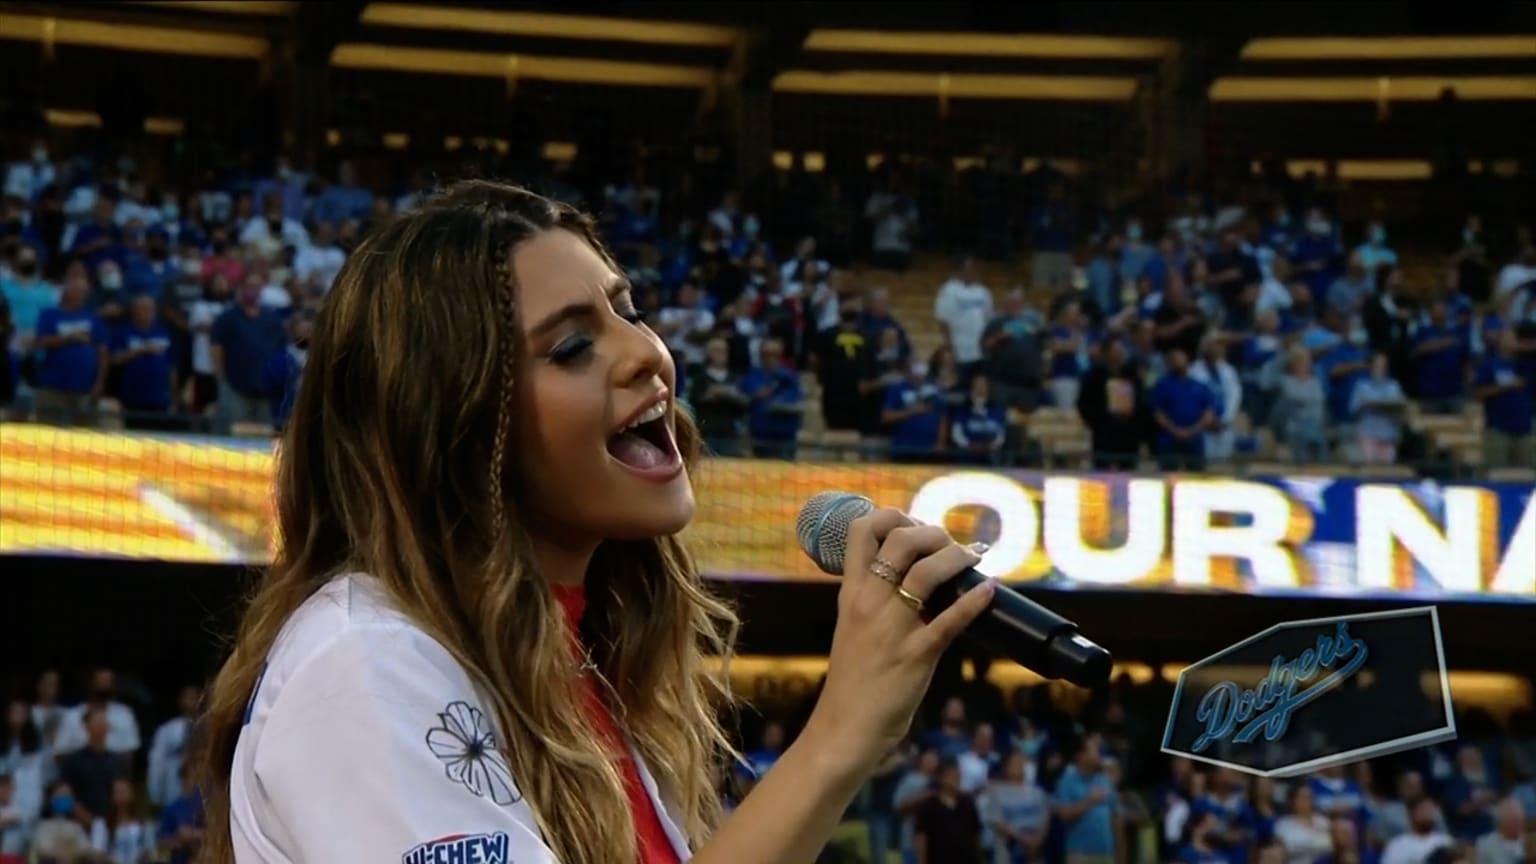 MKY on Instagram: Im honored to be singing the National Anthem @dodgers  for Mexican Heritage night💙🇲🇽 Being born & raised in LA this has always  been a dream of mine! #dodgers #mexicanheritagenight #